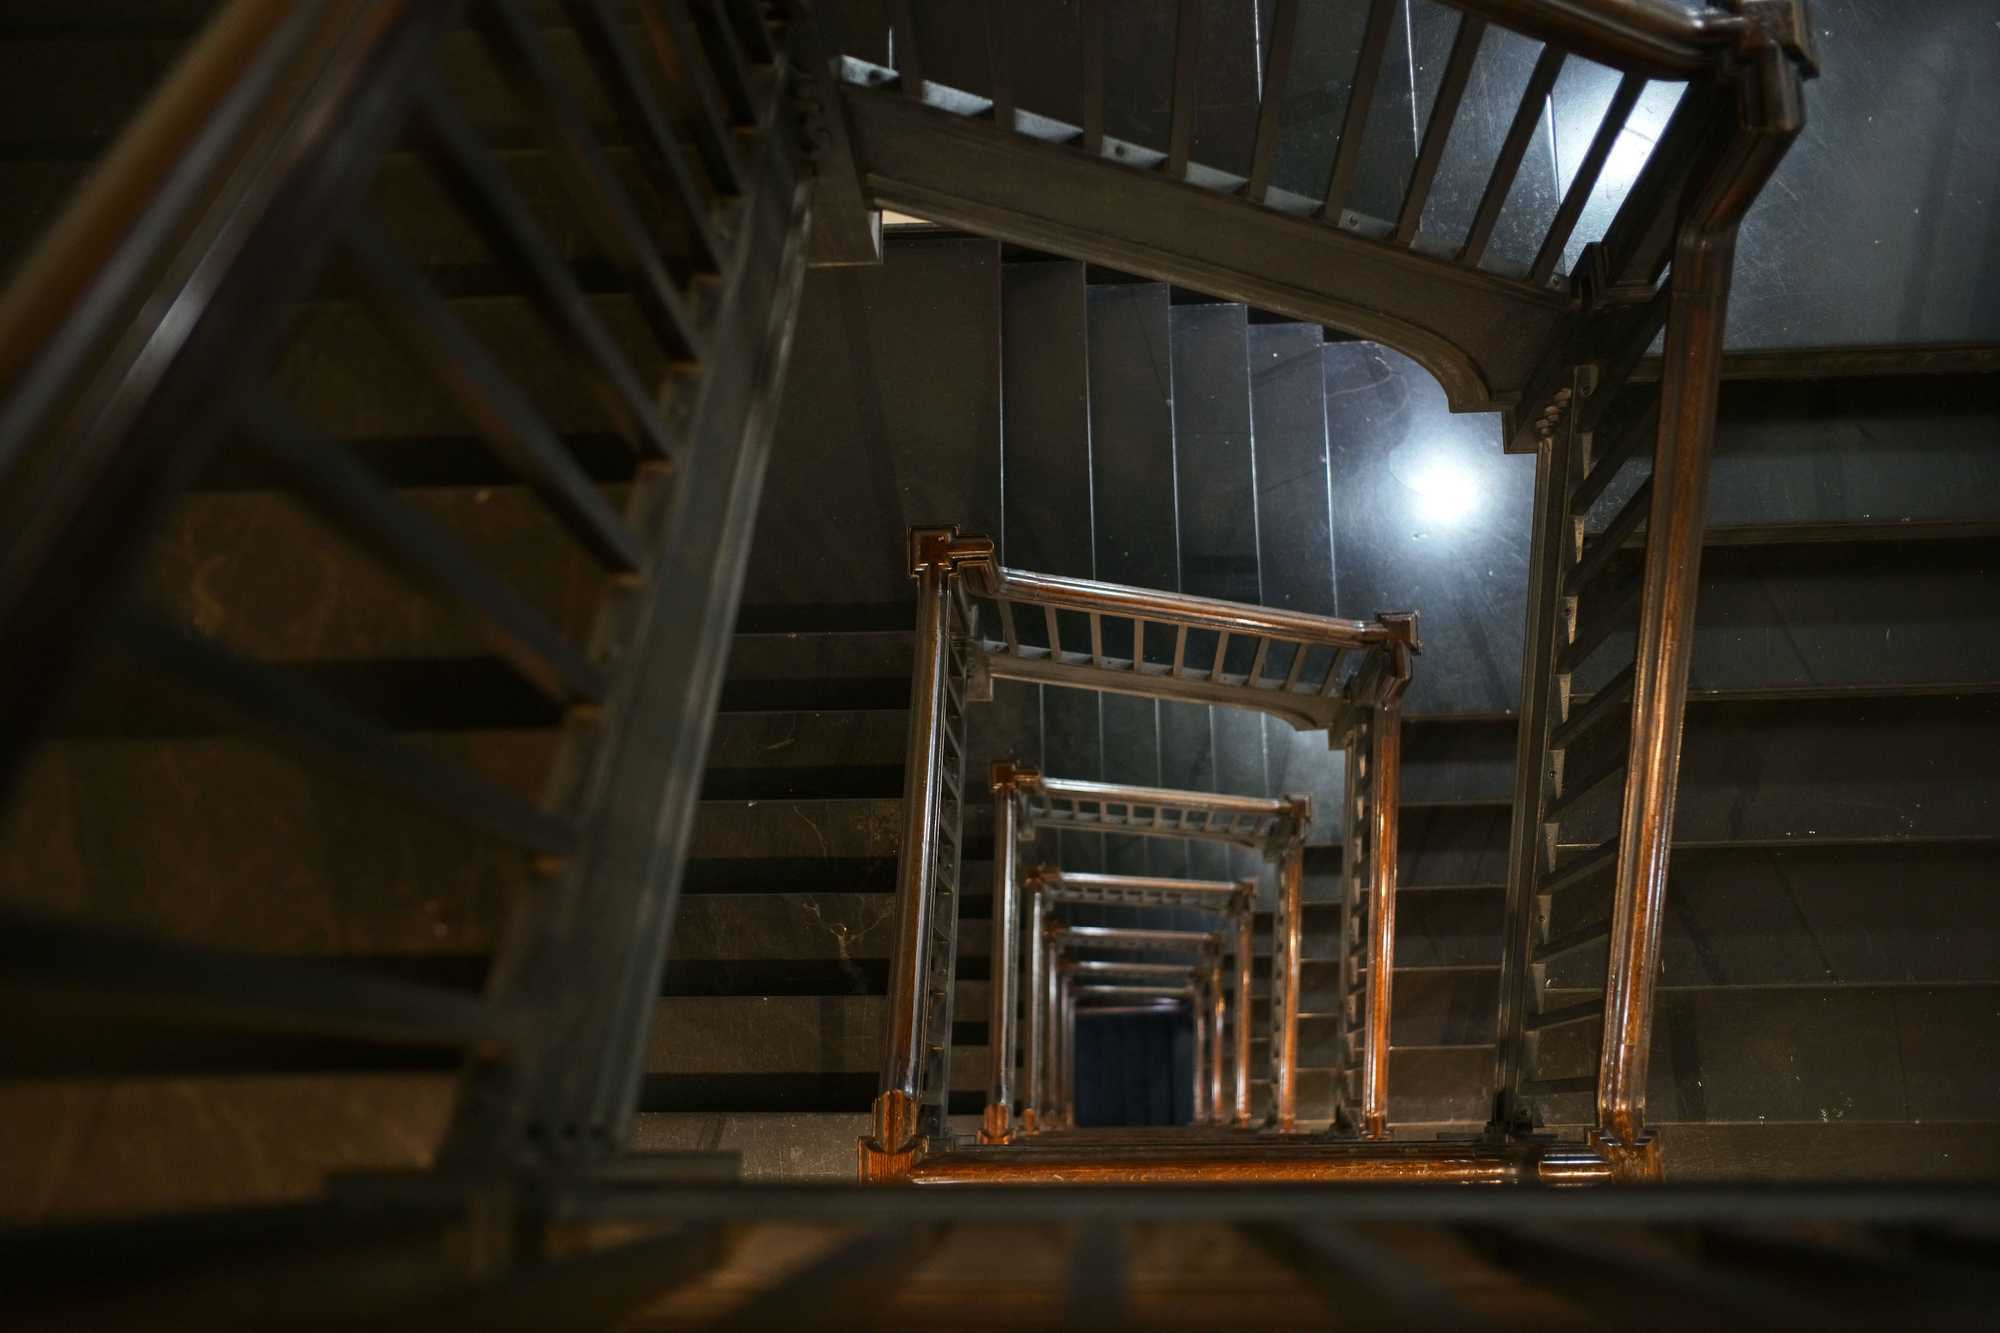 A view of a staircase at the Parkside, a Fenway building that dates to the dawn of the 20th century.